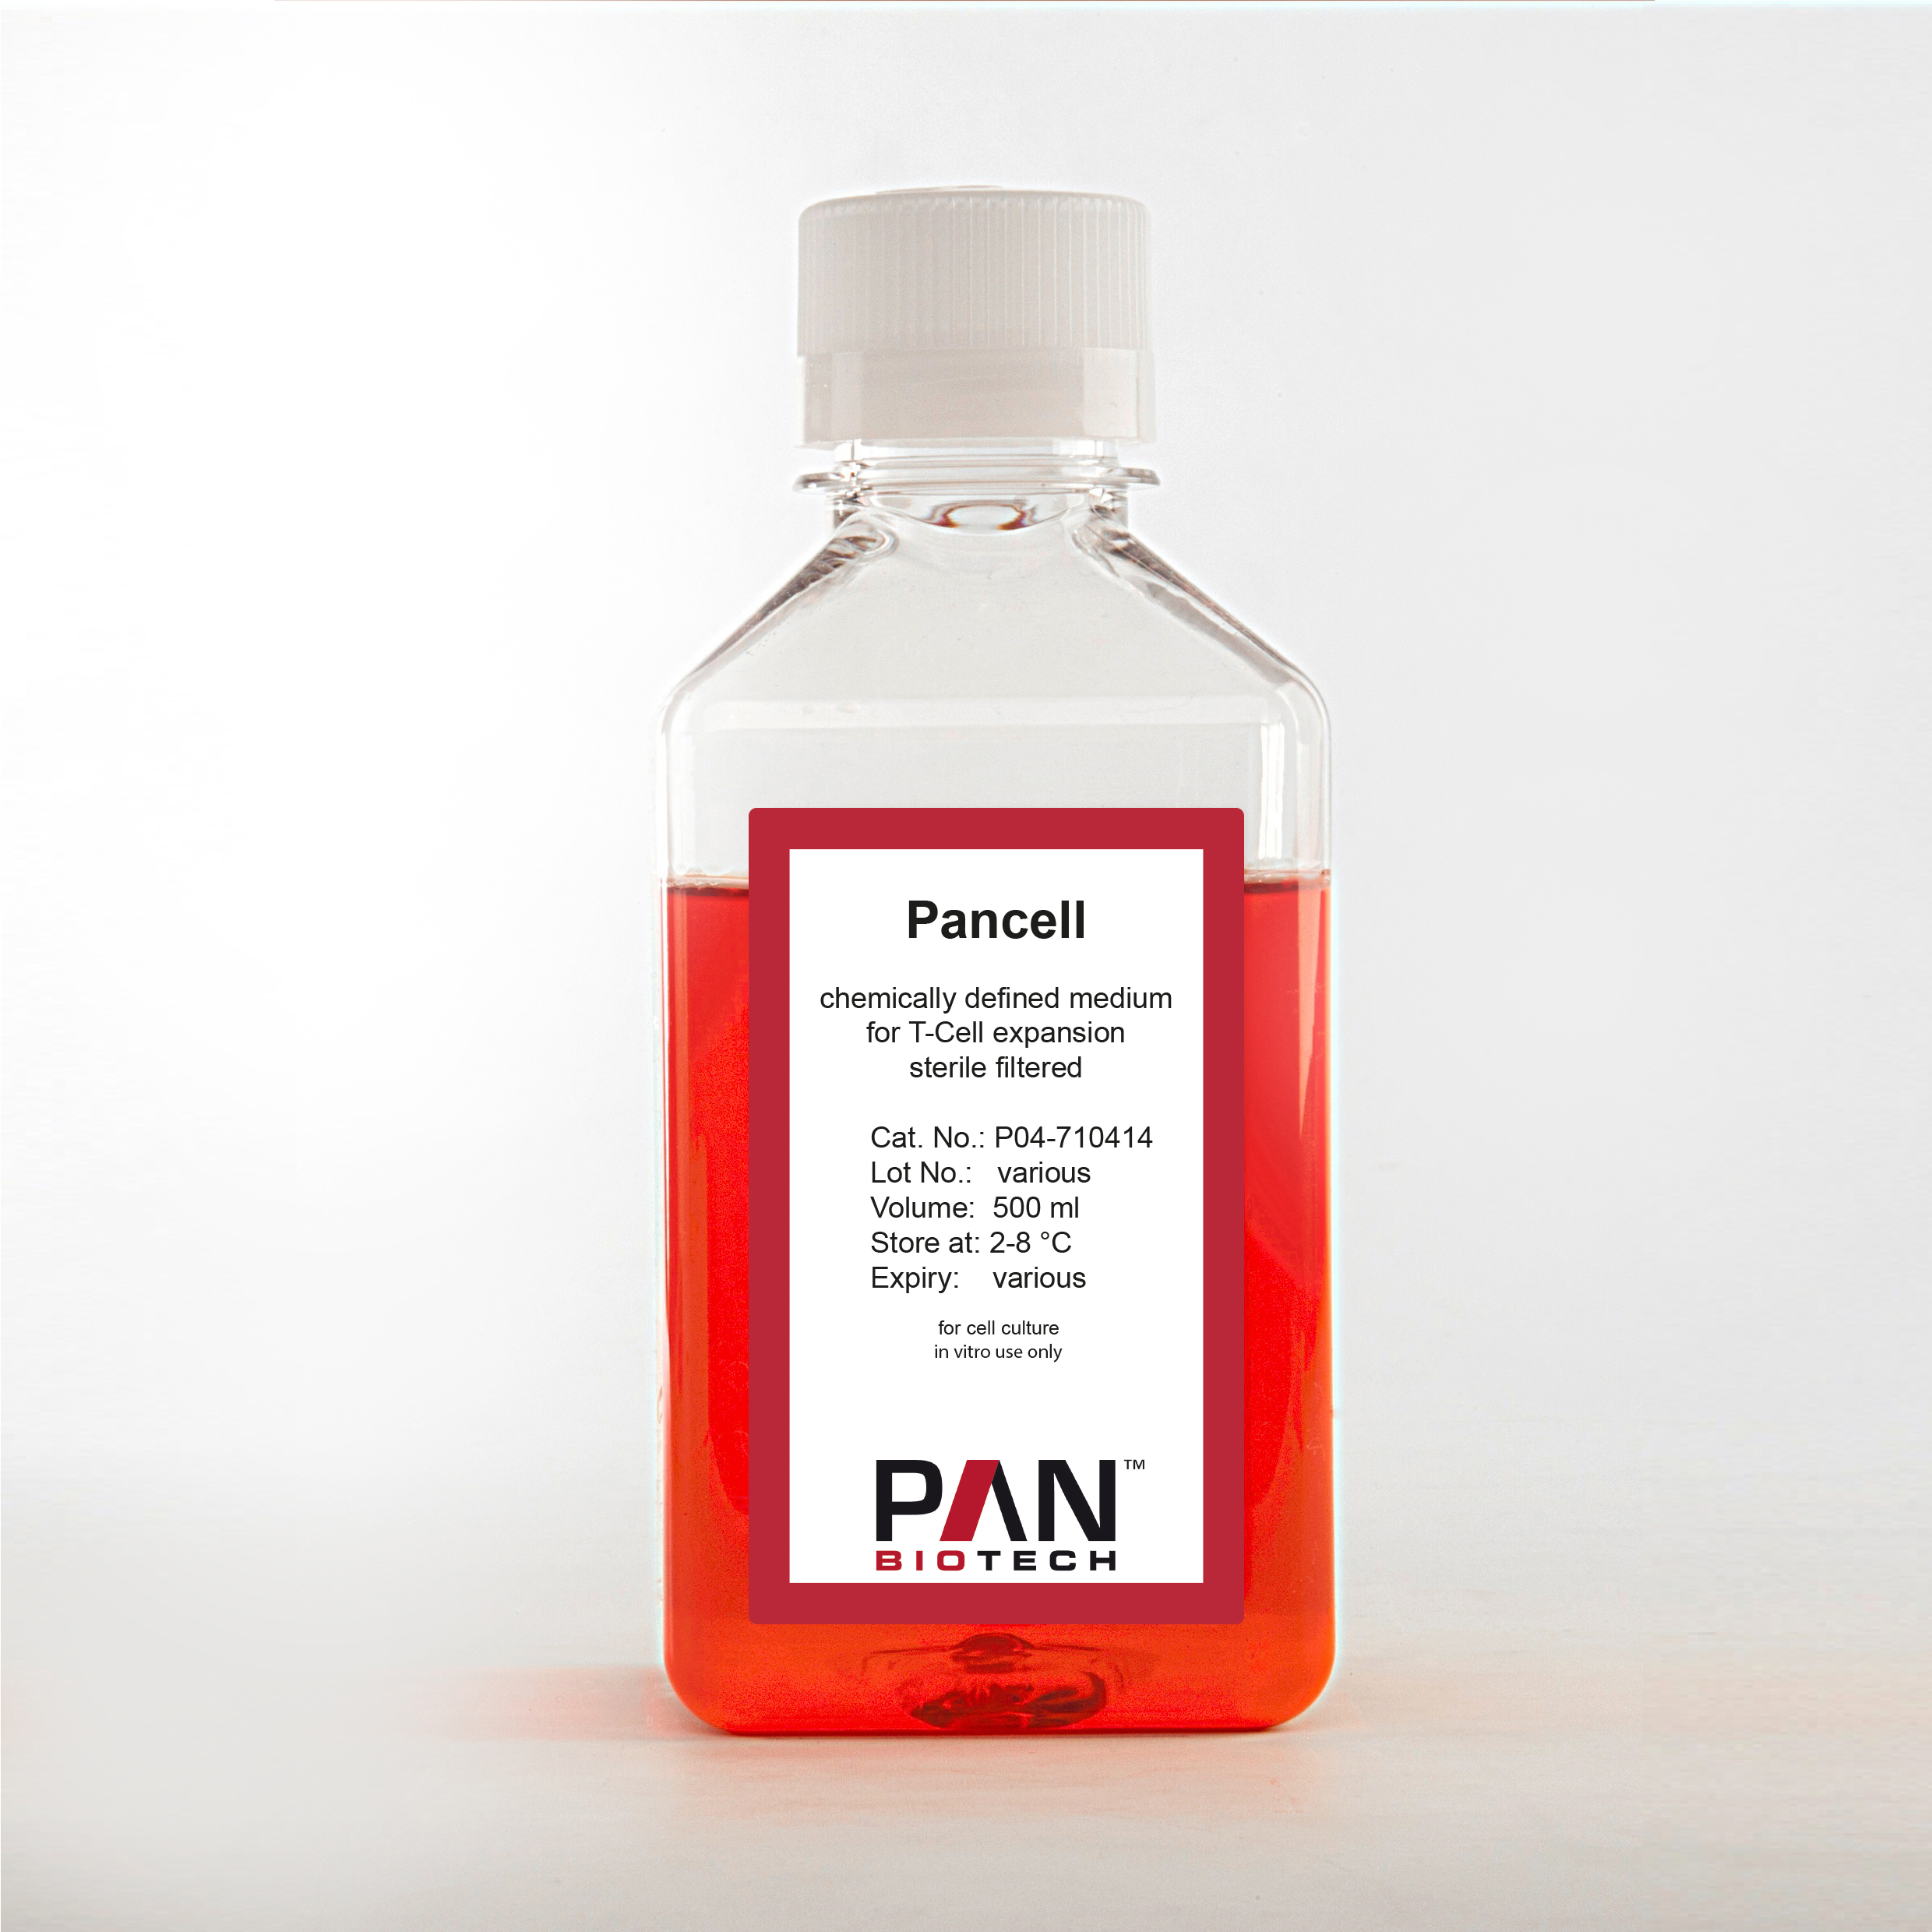 Pancell T, chemically defined medium for T-Cell expansion